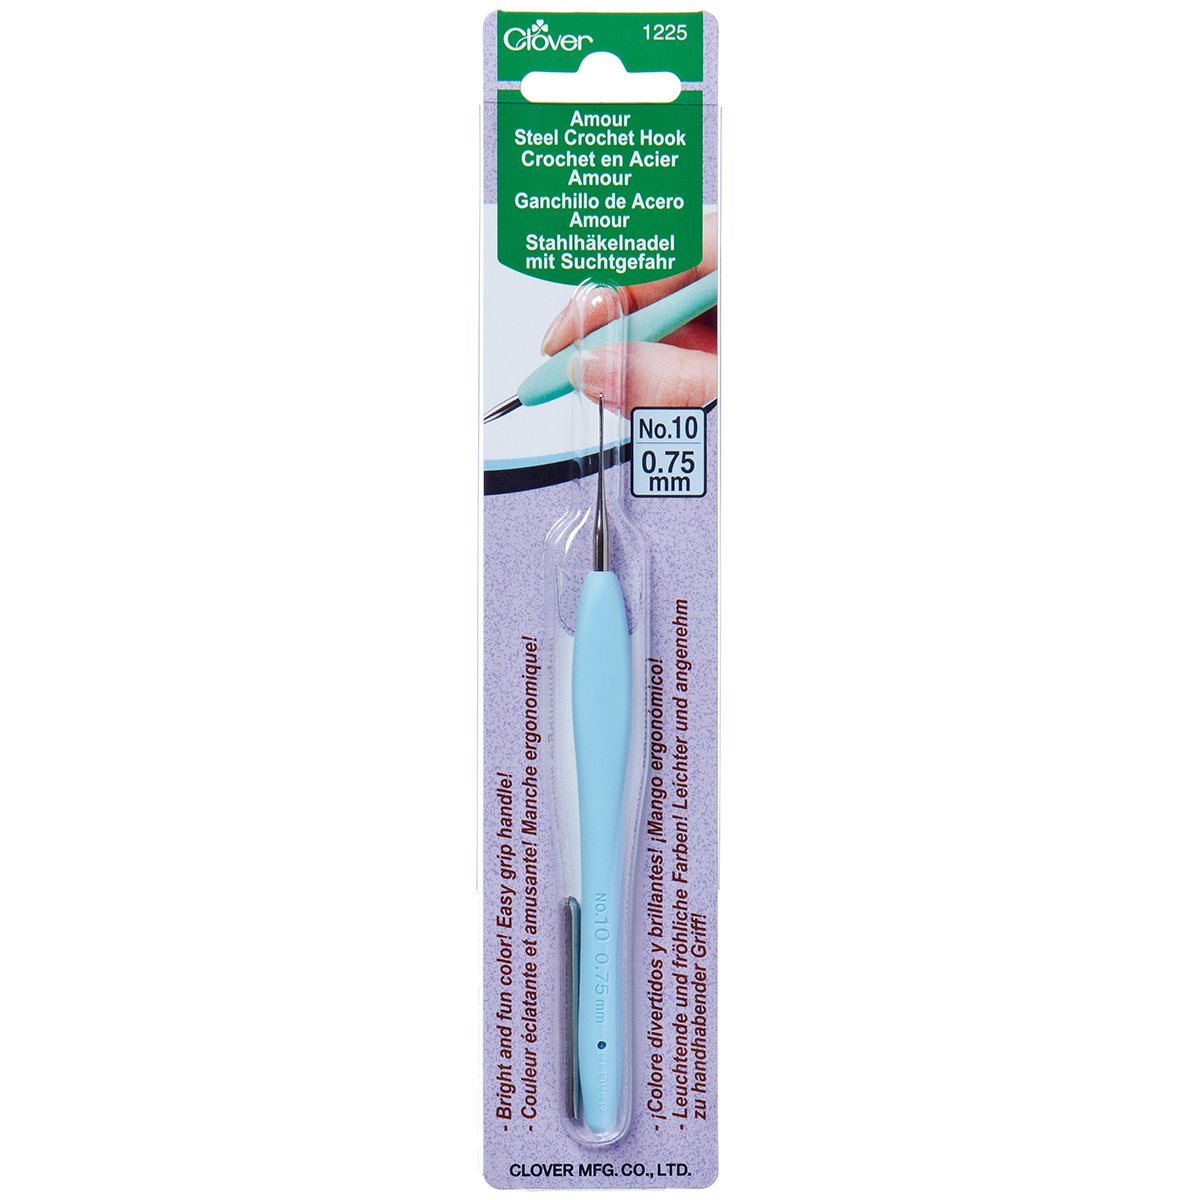 CLOVER AMOUR Steel Crochet Hook Set. 7 Small Sizes 0-12 With Comfort Grip  Handles. for Fine Crochet Like Lace, Doilies, Thread. 3675 -  India